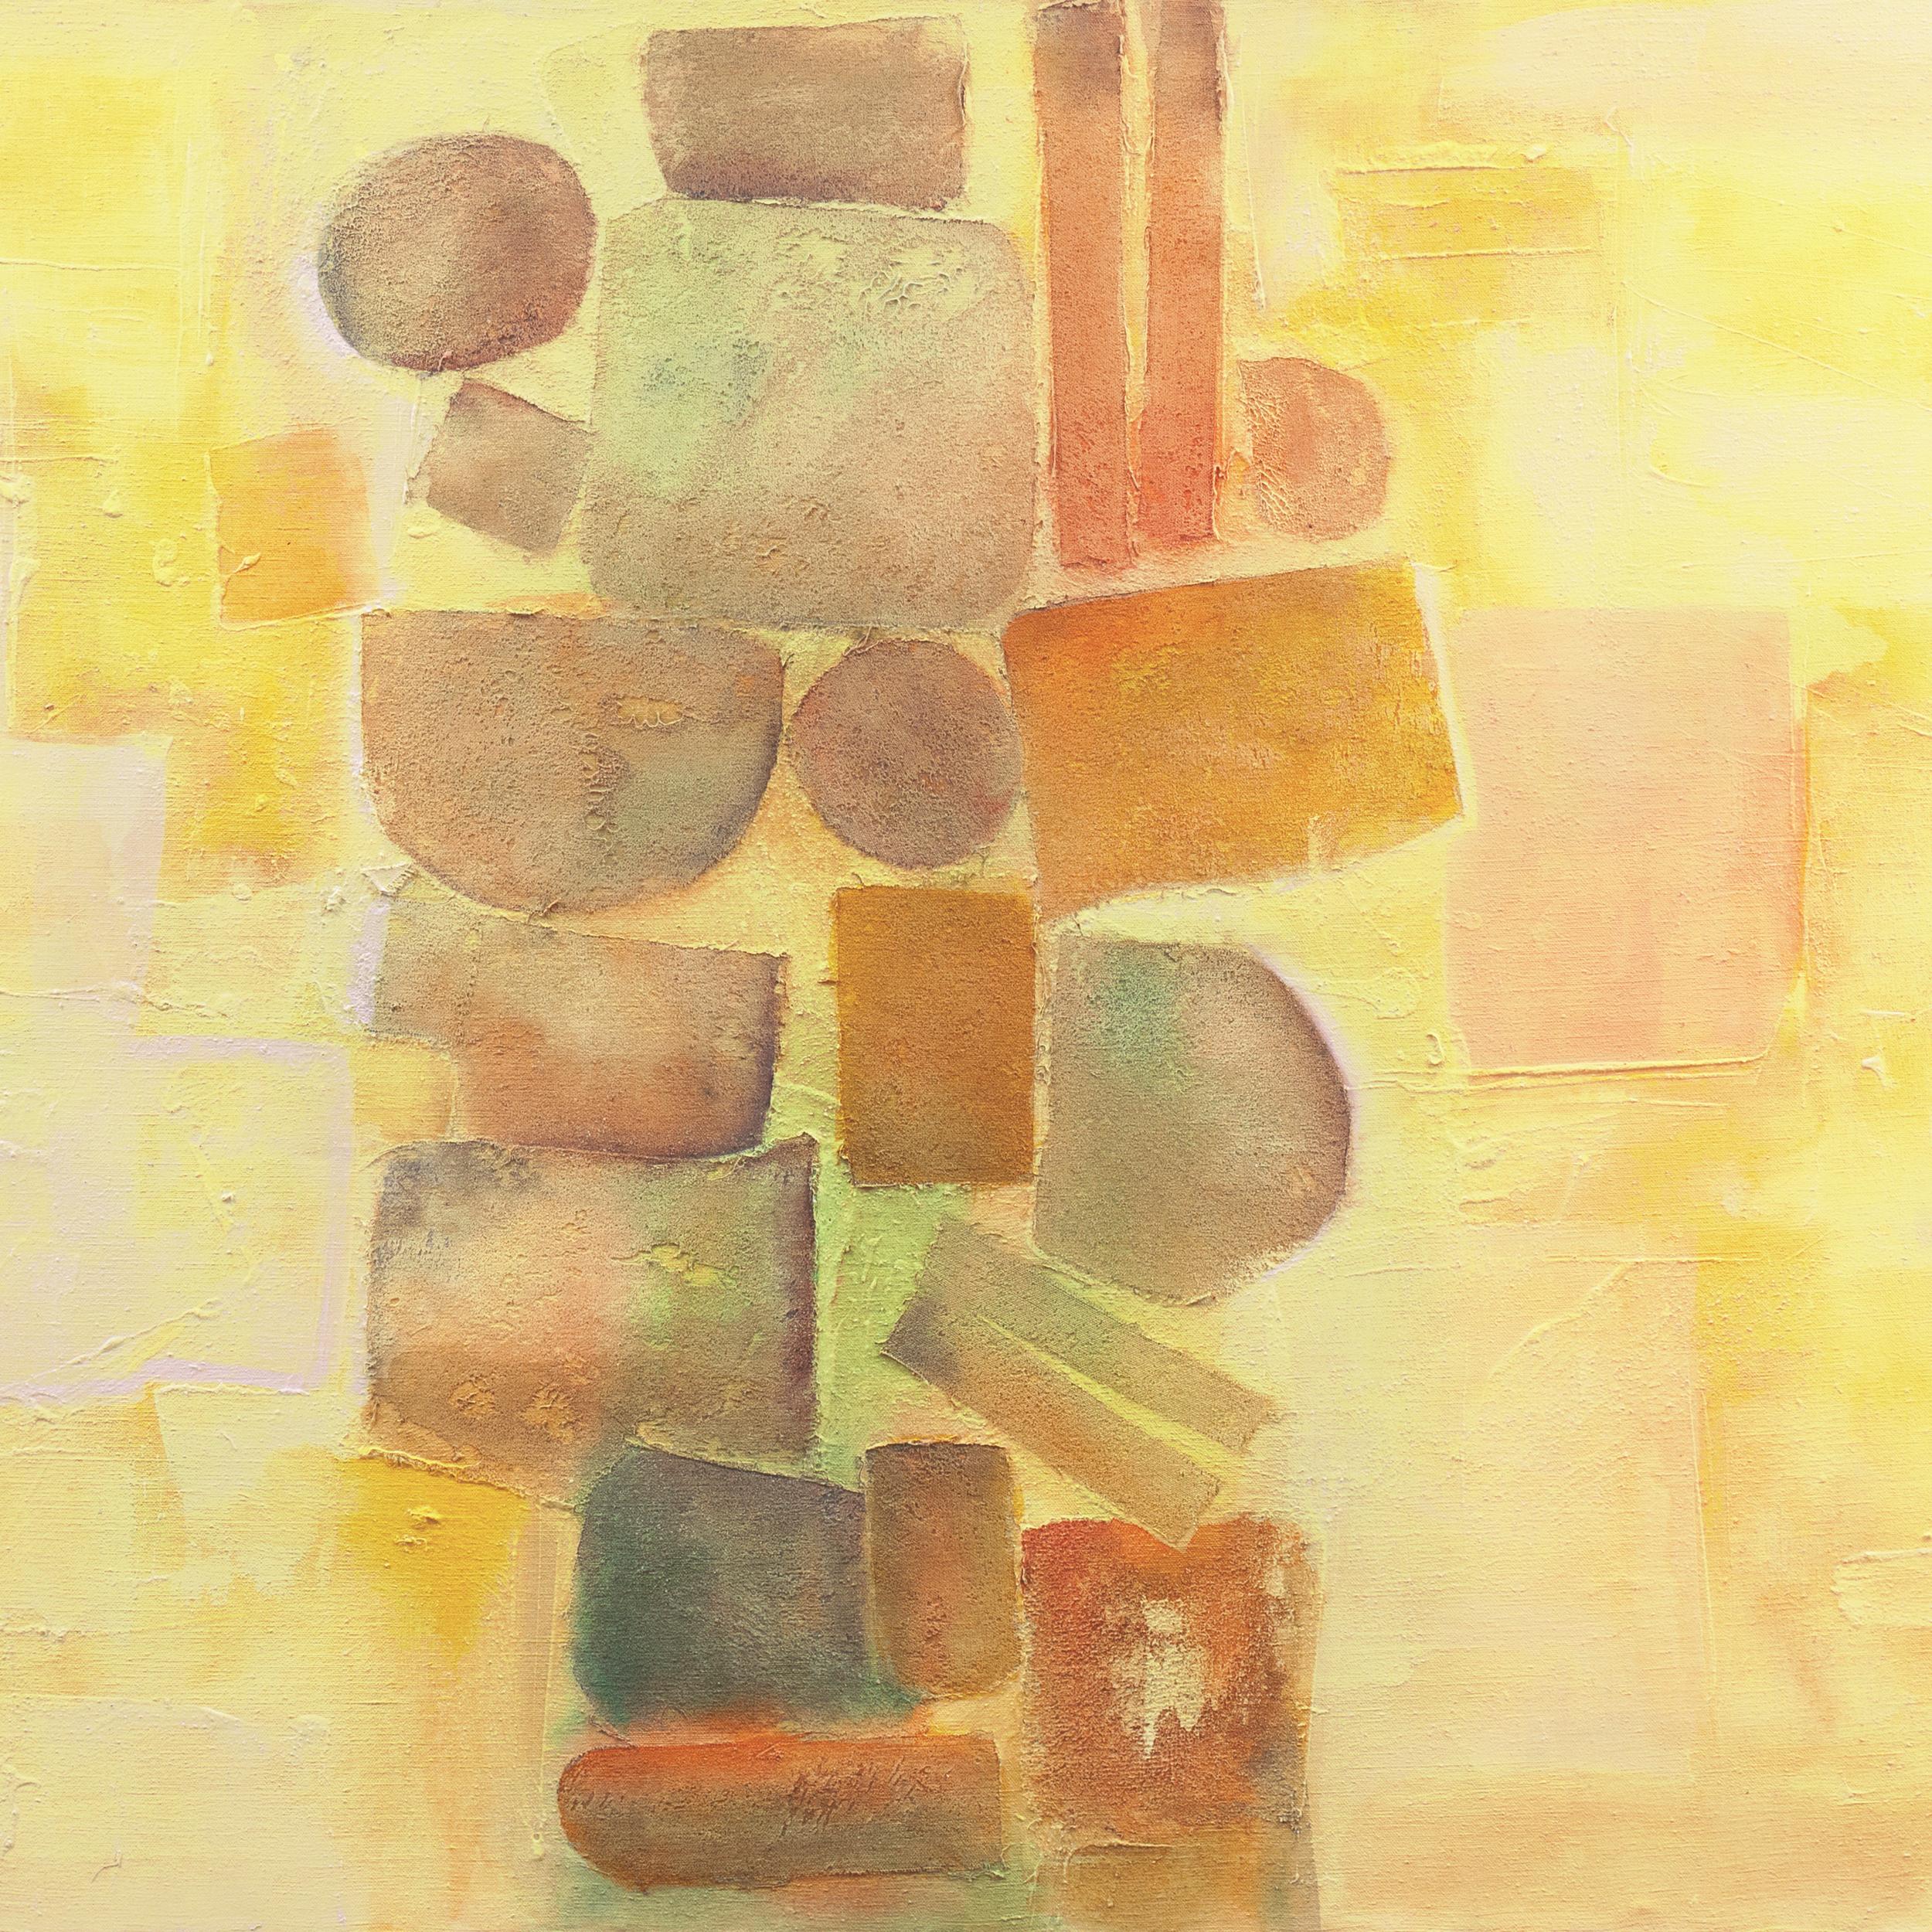 'Construction in Saffron and Tourmaline', French Geometric Abstract, Los Robles (Geometrische Abstraktion), Painting, von Remy Aron